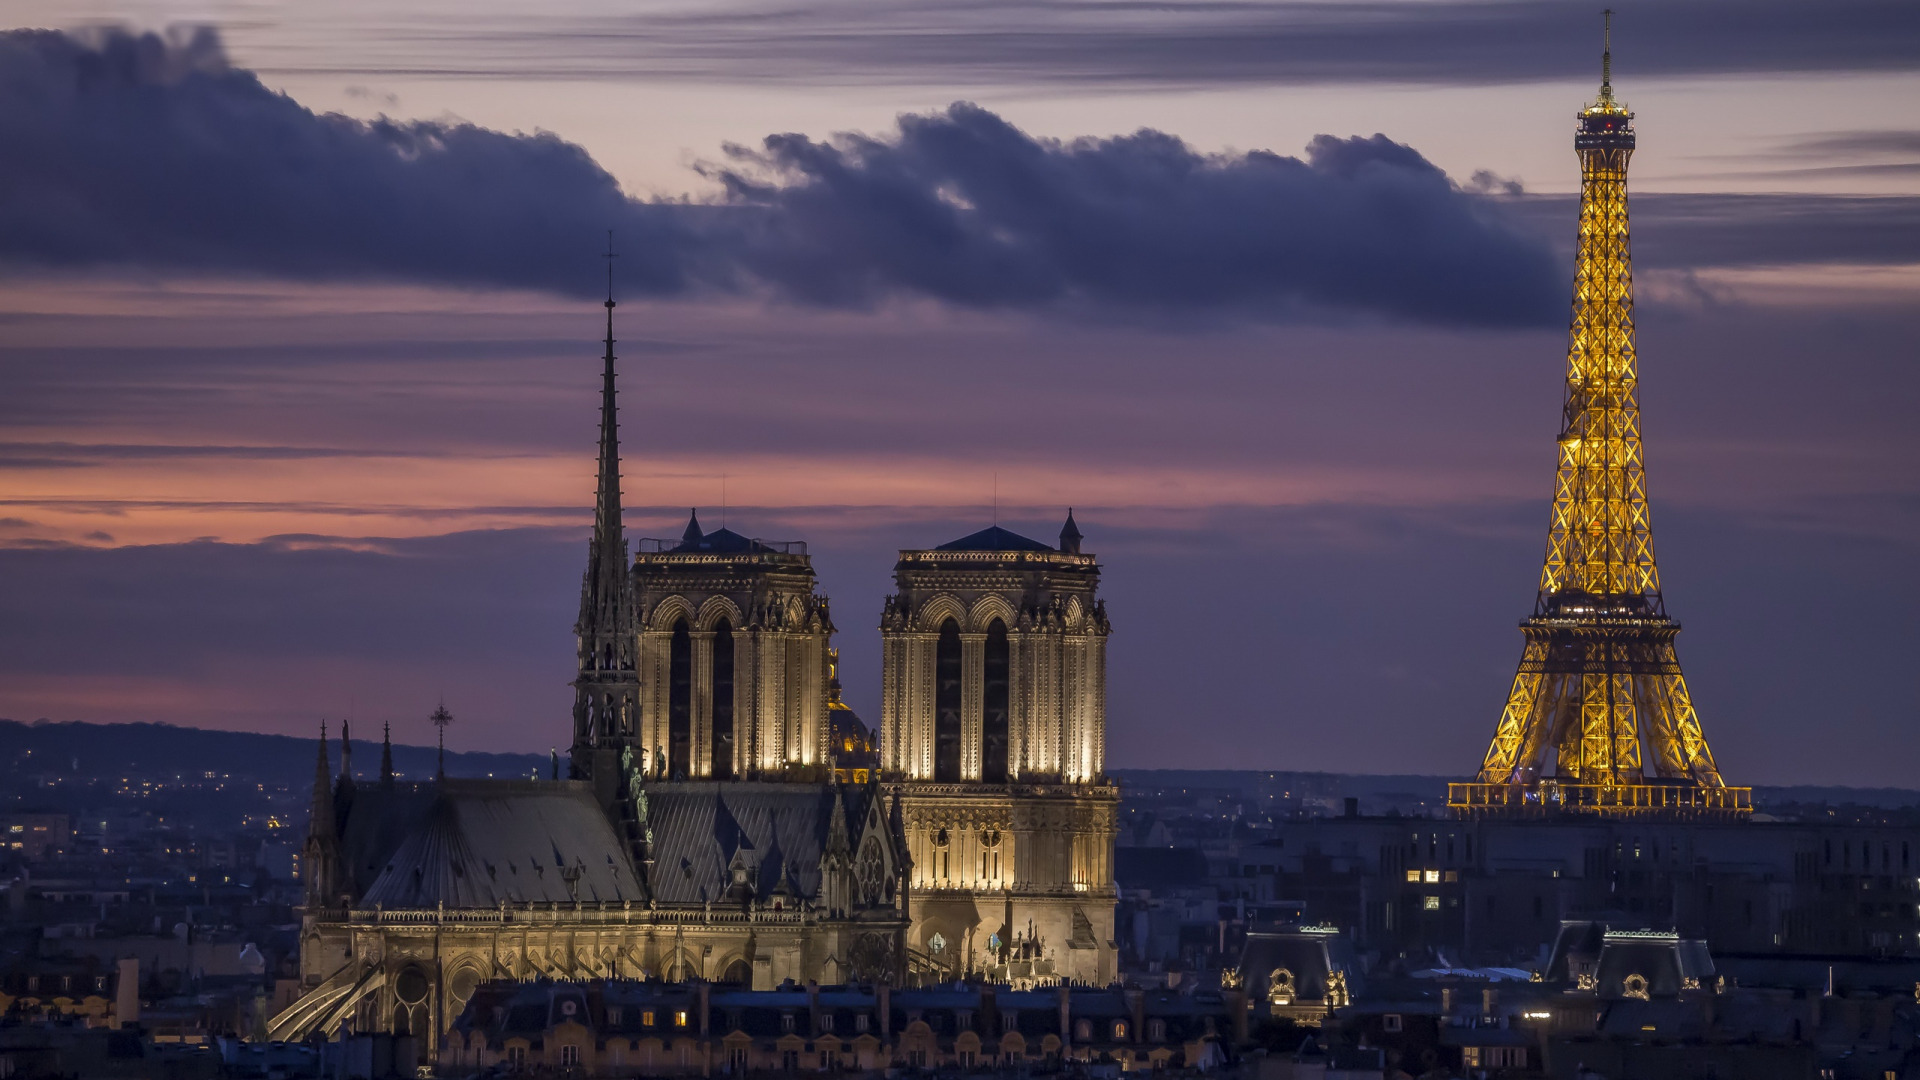 General 1920x1080 architecture building house Paris Eiffel Tower clouds evening sunset Notre-Dame cathedral capital France landmark Europe